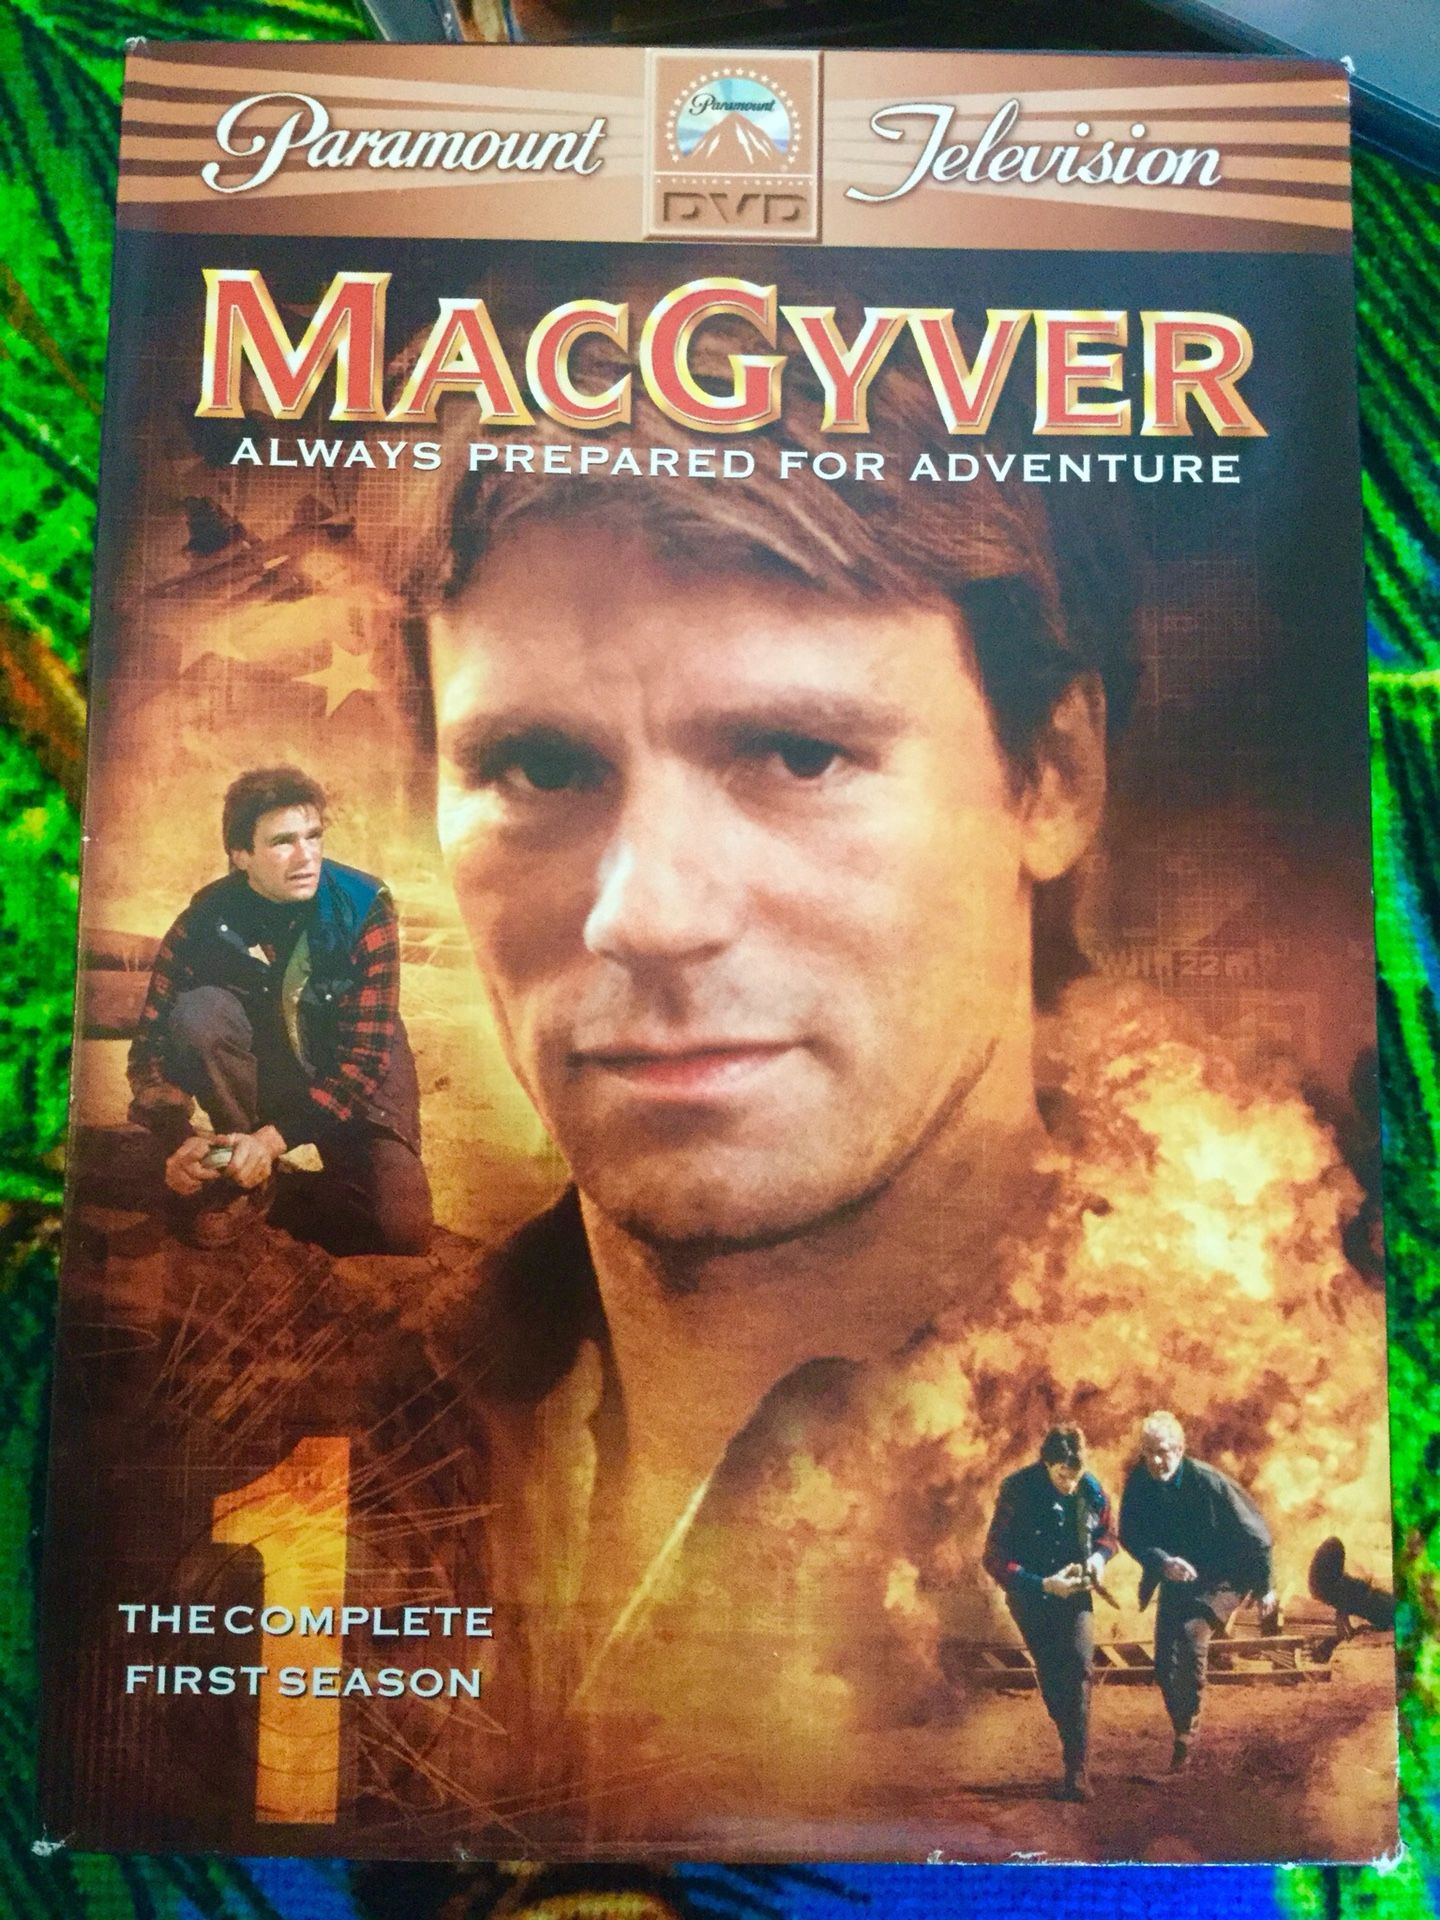 The Complete 1 st Season 6 DVD disc Movies / MacGyver Ready for Adventure 😎👍. 📀📀. 🎥🍿